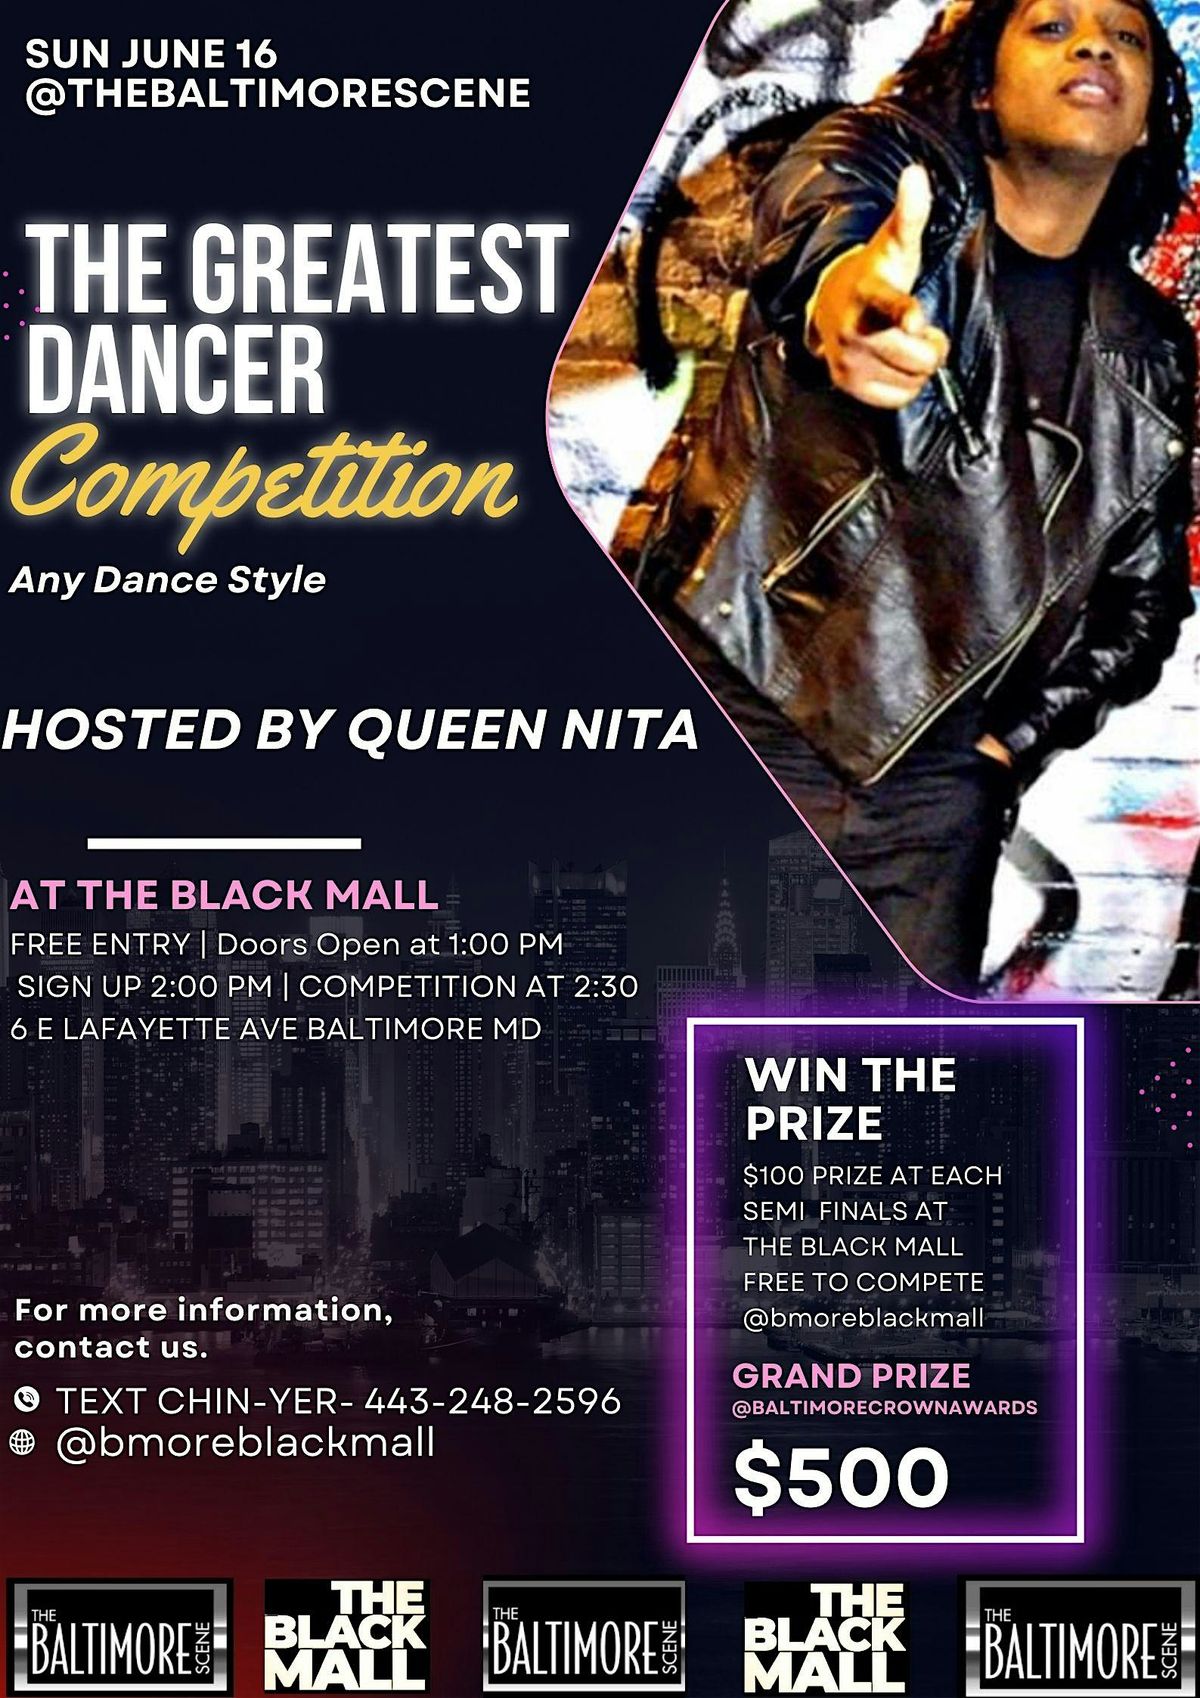 THE GREATEST DANCER COMPETITION: FREE TO COMPETE &  ATTEND 500 GRAND PRIZE